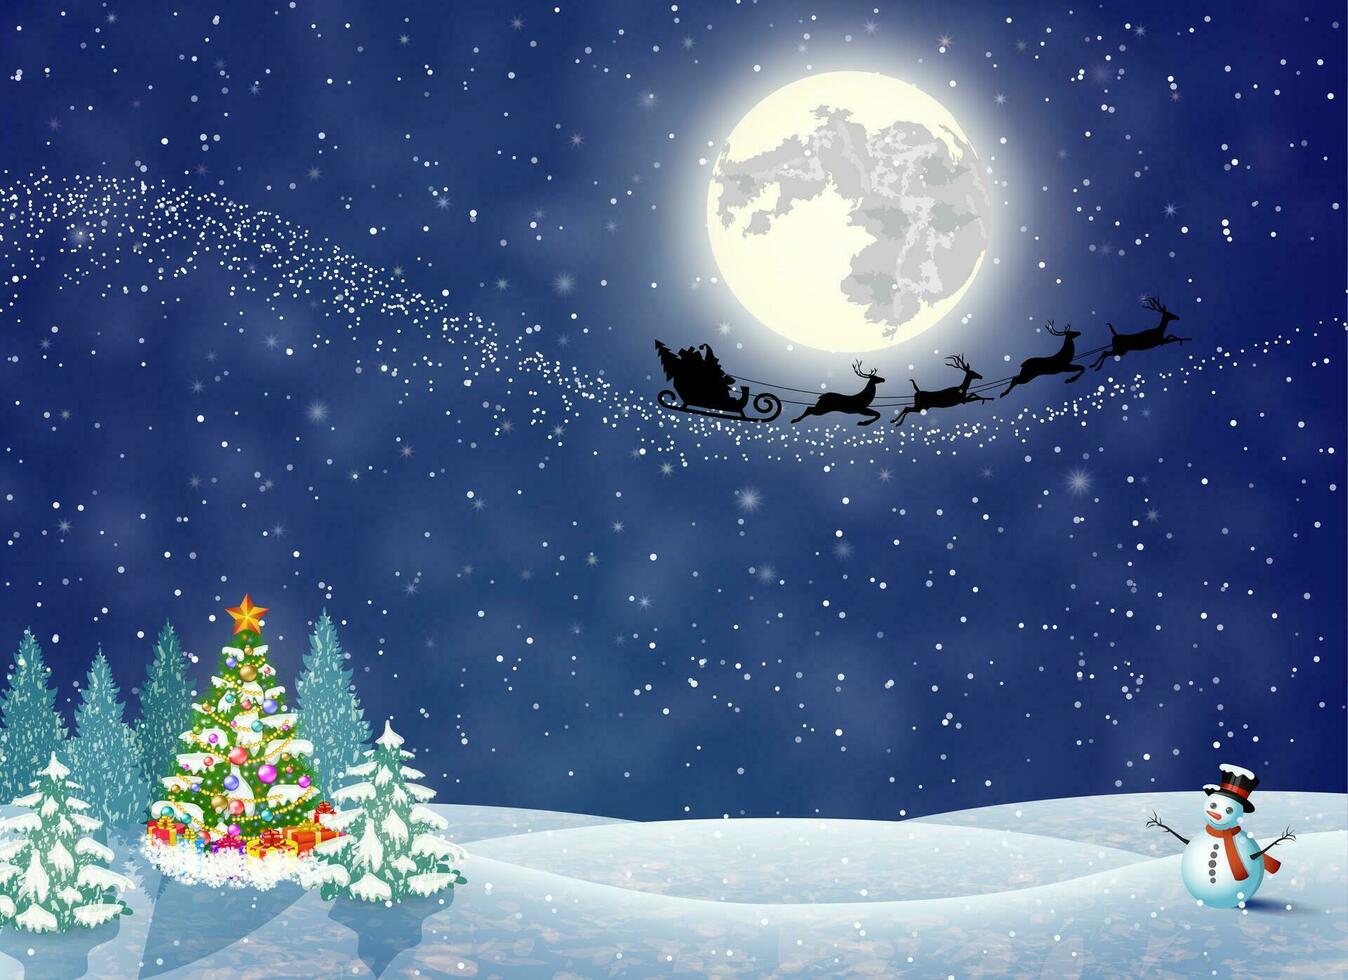 Christmas landscape at night vector